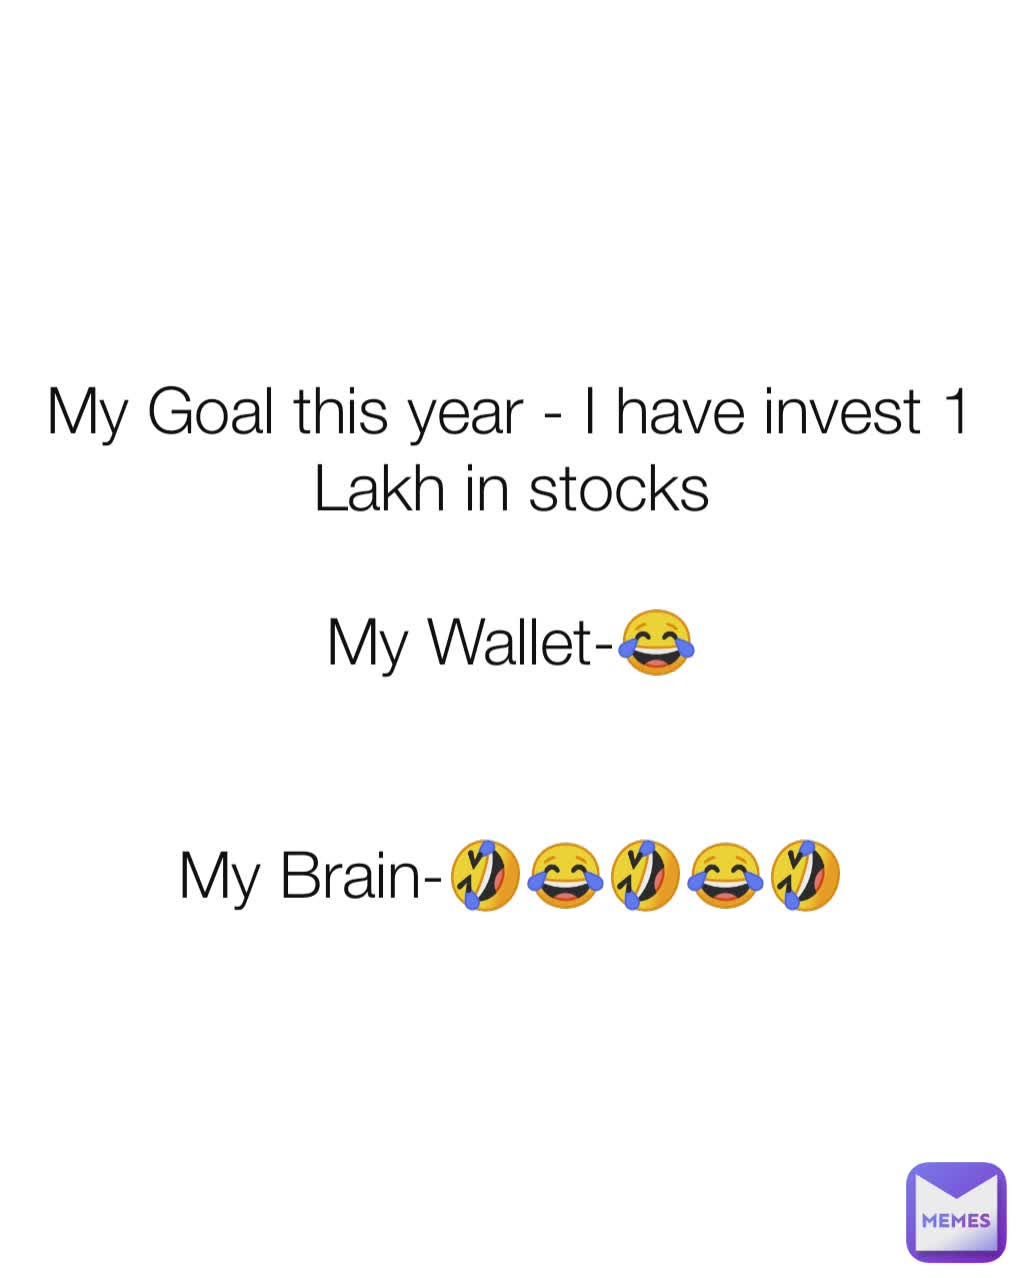 My Goal this year - I have invest 1 Lakh in stocks

My Wallet-😂


My Brain-🤣😂🤣😂🤣